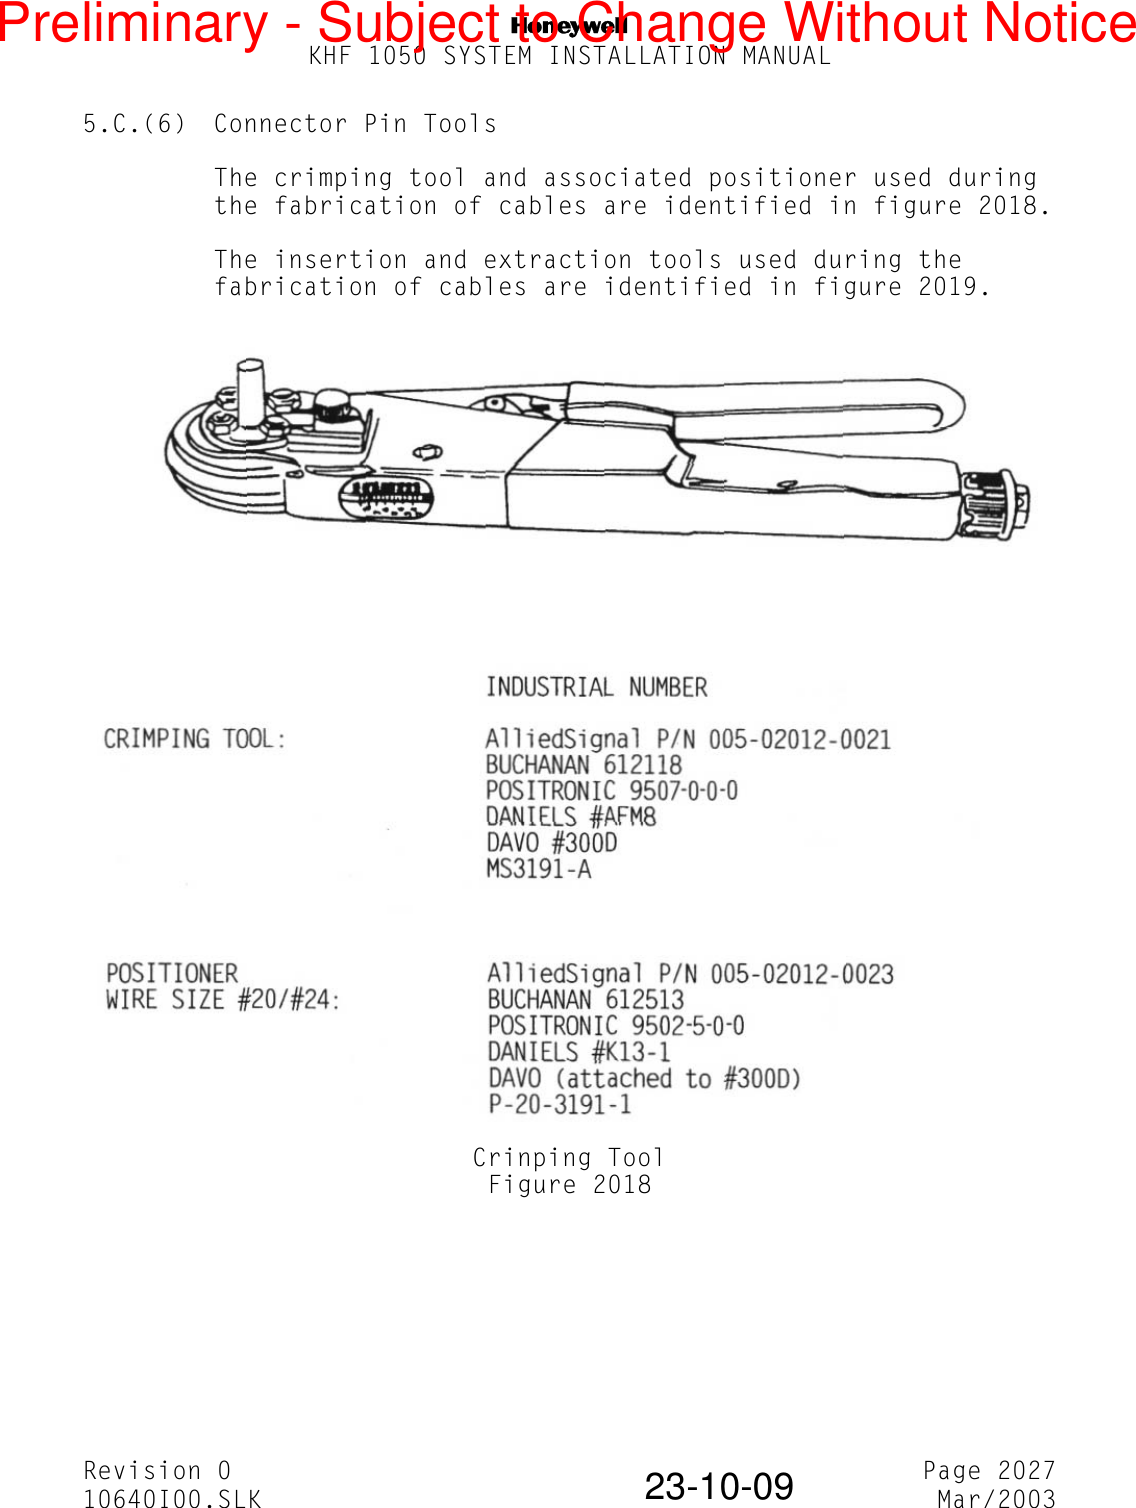 NKHF 1050 SYSTEM INSTALLATION MANUALRevision 0 Page 202710640I00.SLK Mar/200323-10-095.C.(6) Connector Pin ToolsThe crimping tool and associated positioner used during the fabrication of cables are identified in figure 2018.The insertion and extraction tools used during the fabrication of cables are identified in figure 2019.Crinping ToolFigure 2018Preliminary - Subject to Change Without Notice